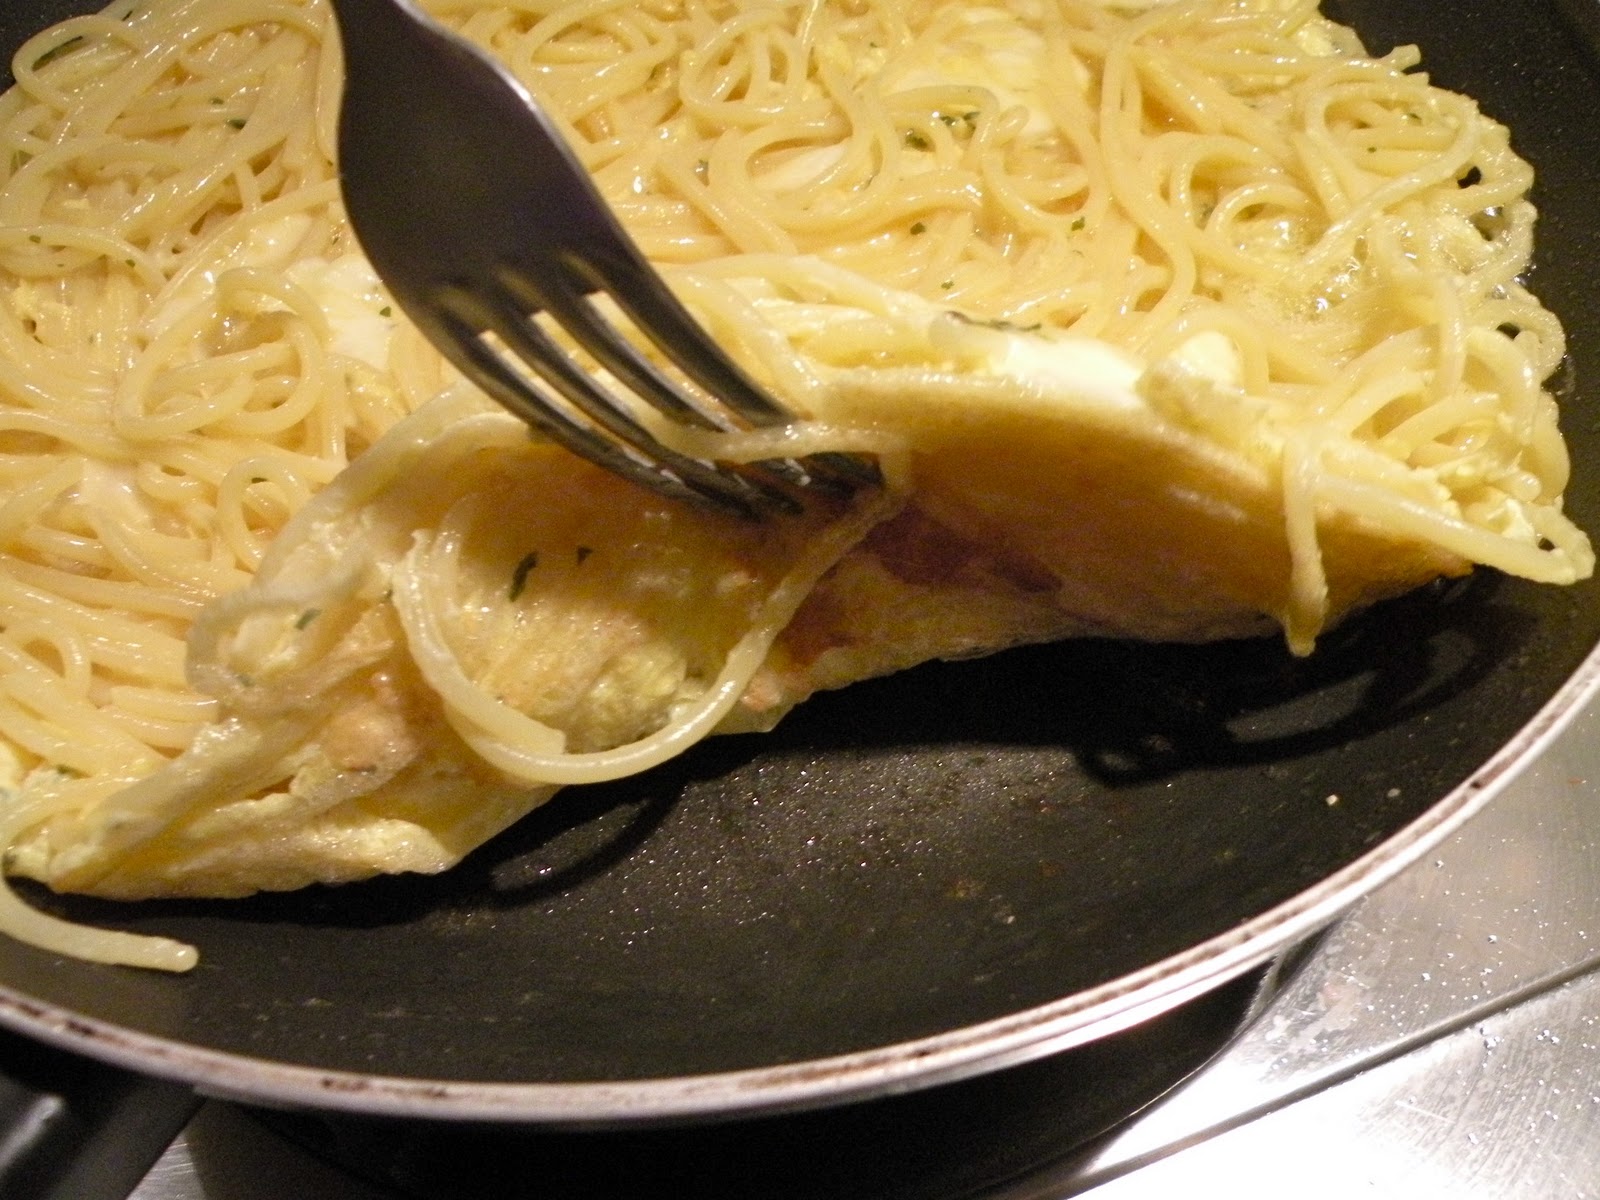 A time for everything: Spaghetti Omelette